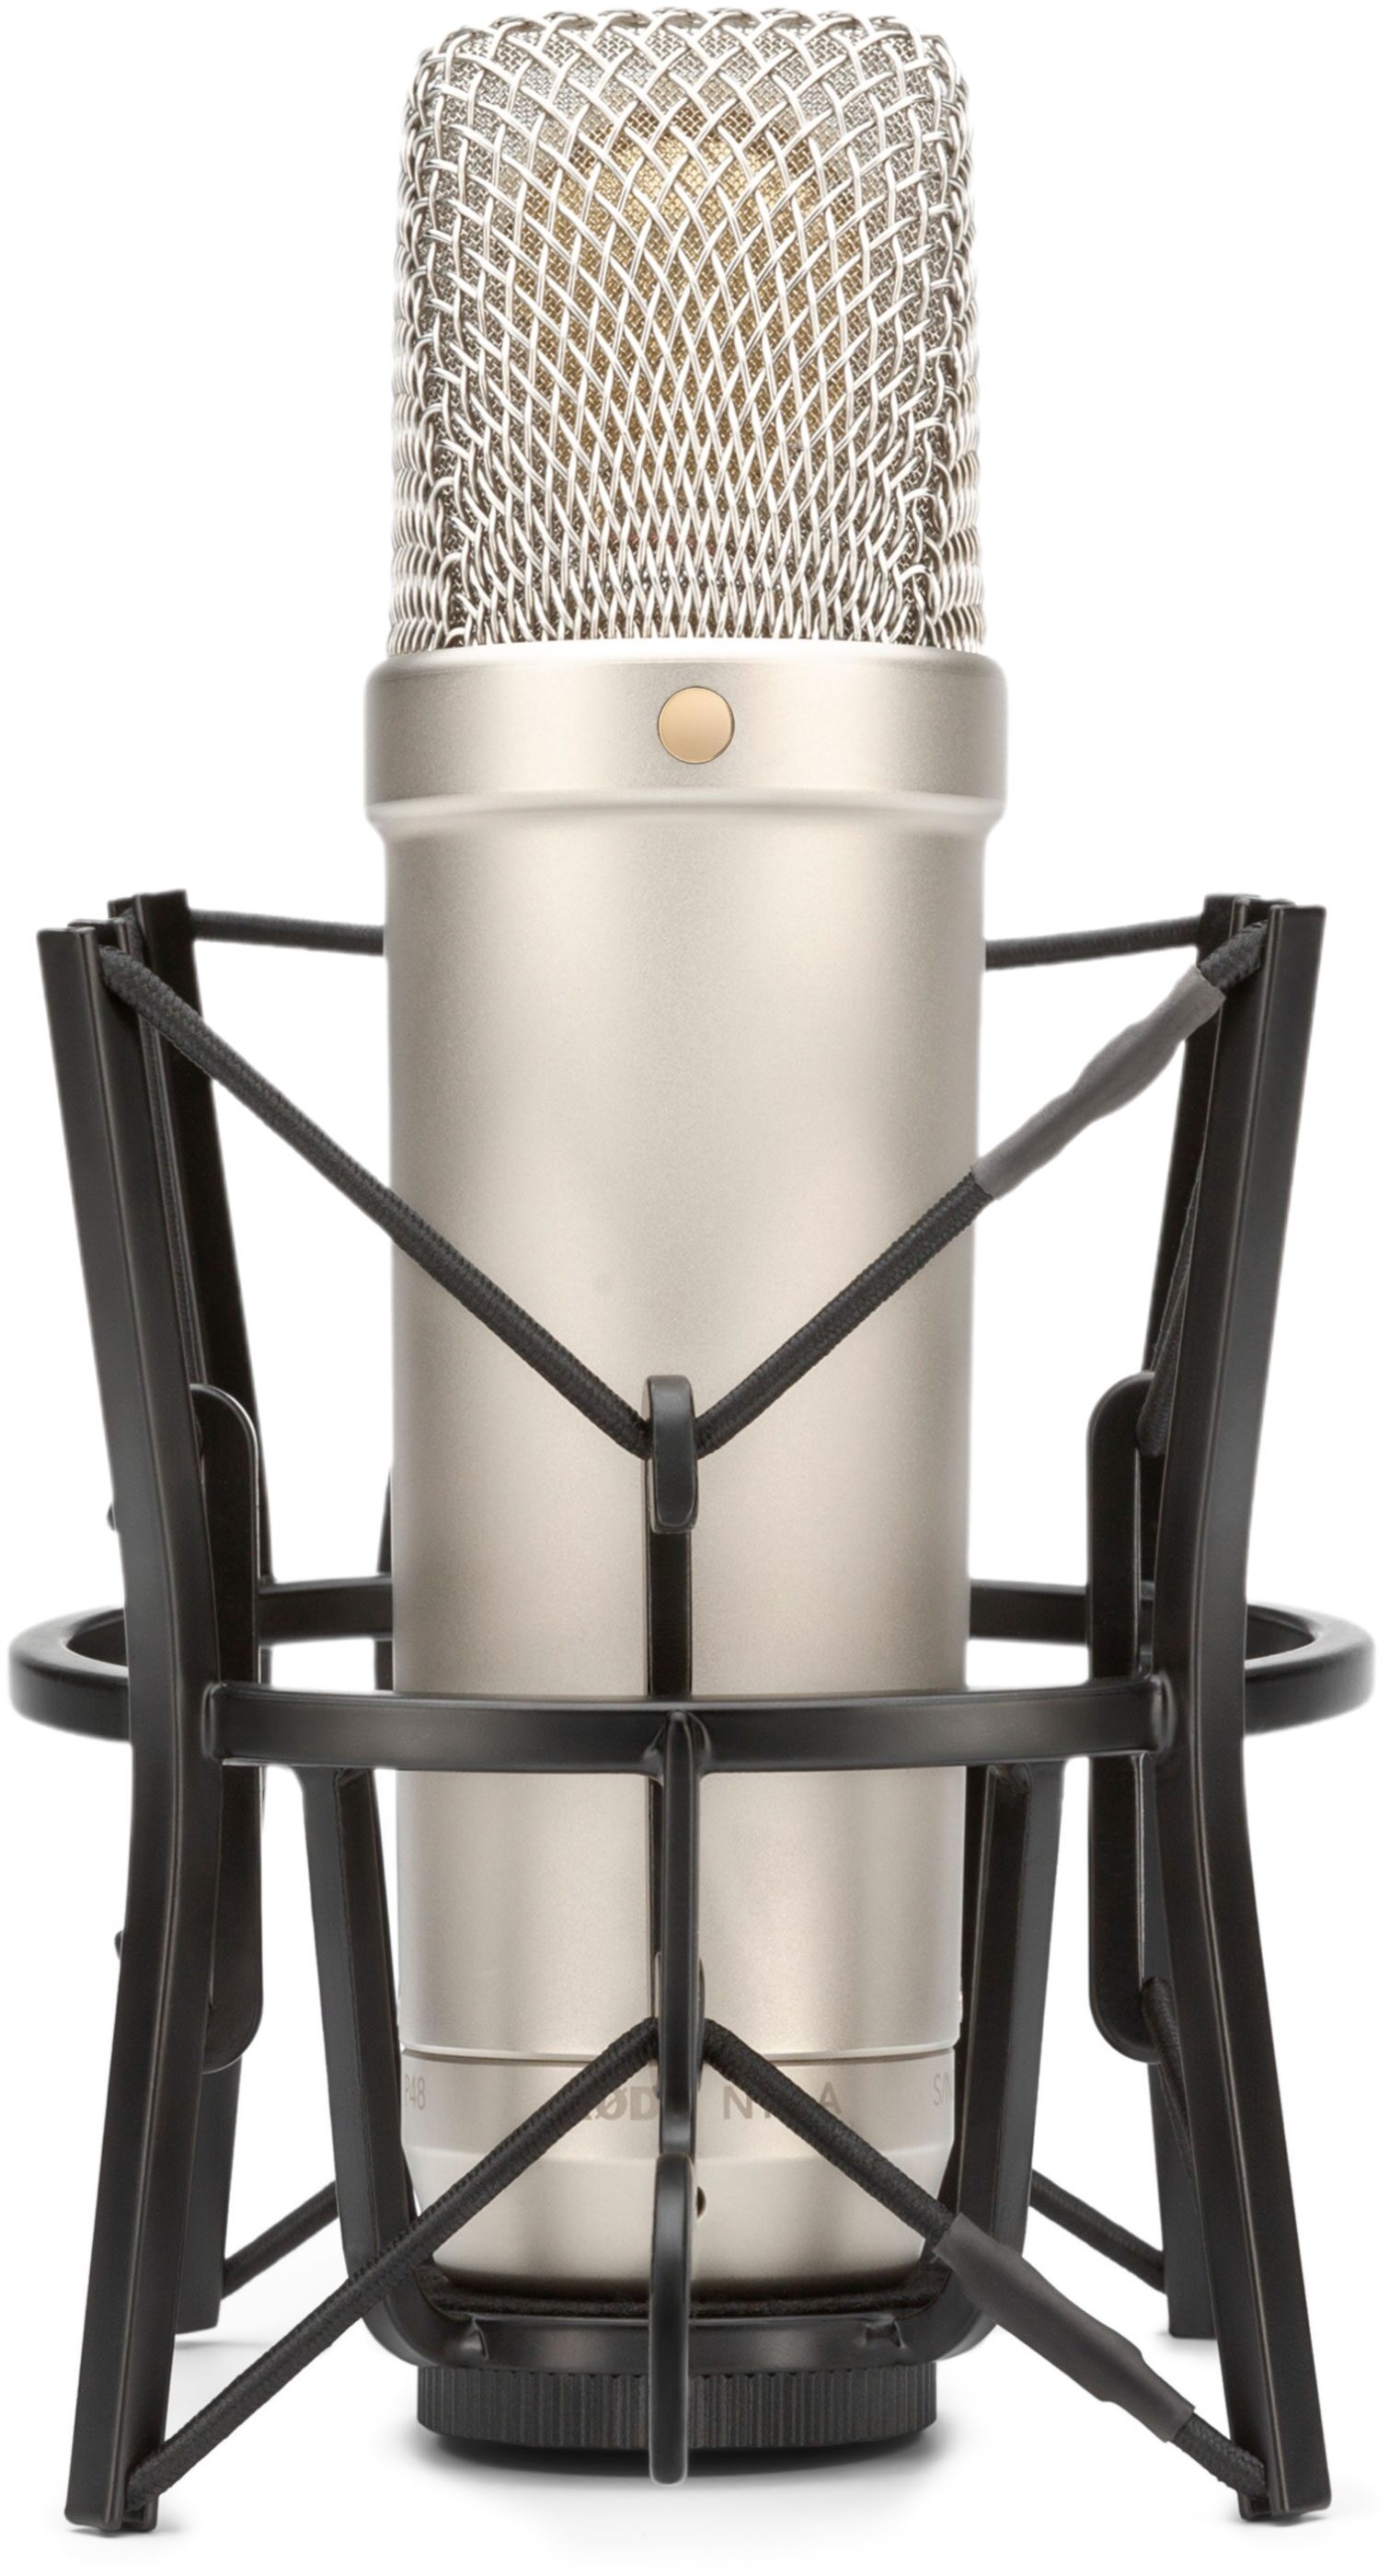 Rode NT1A Complete Vocal Recording Microphone 698813000142